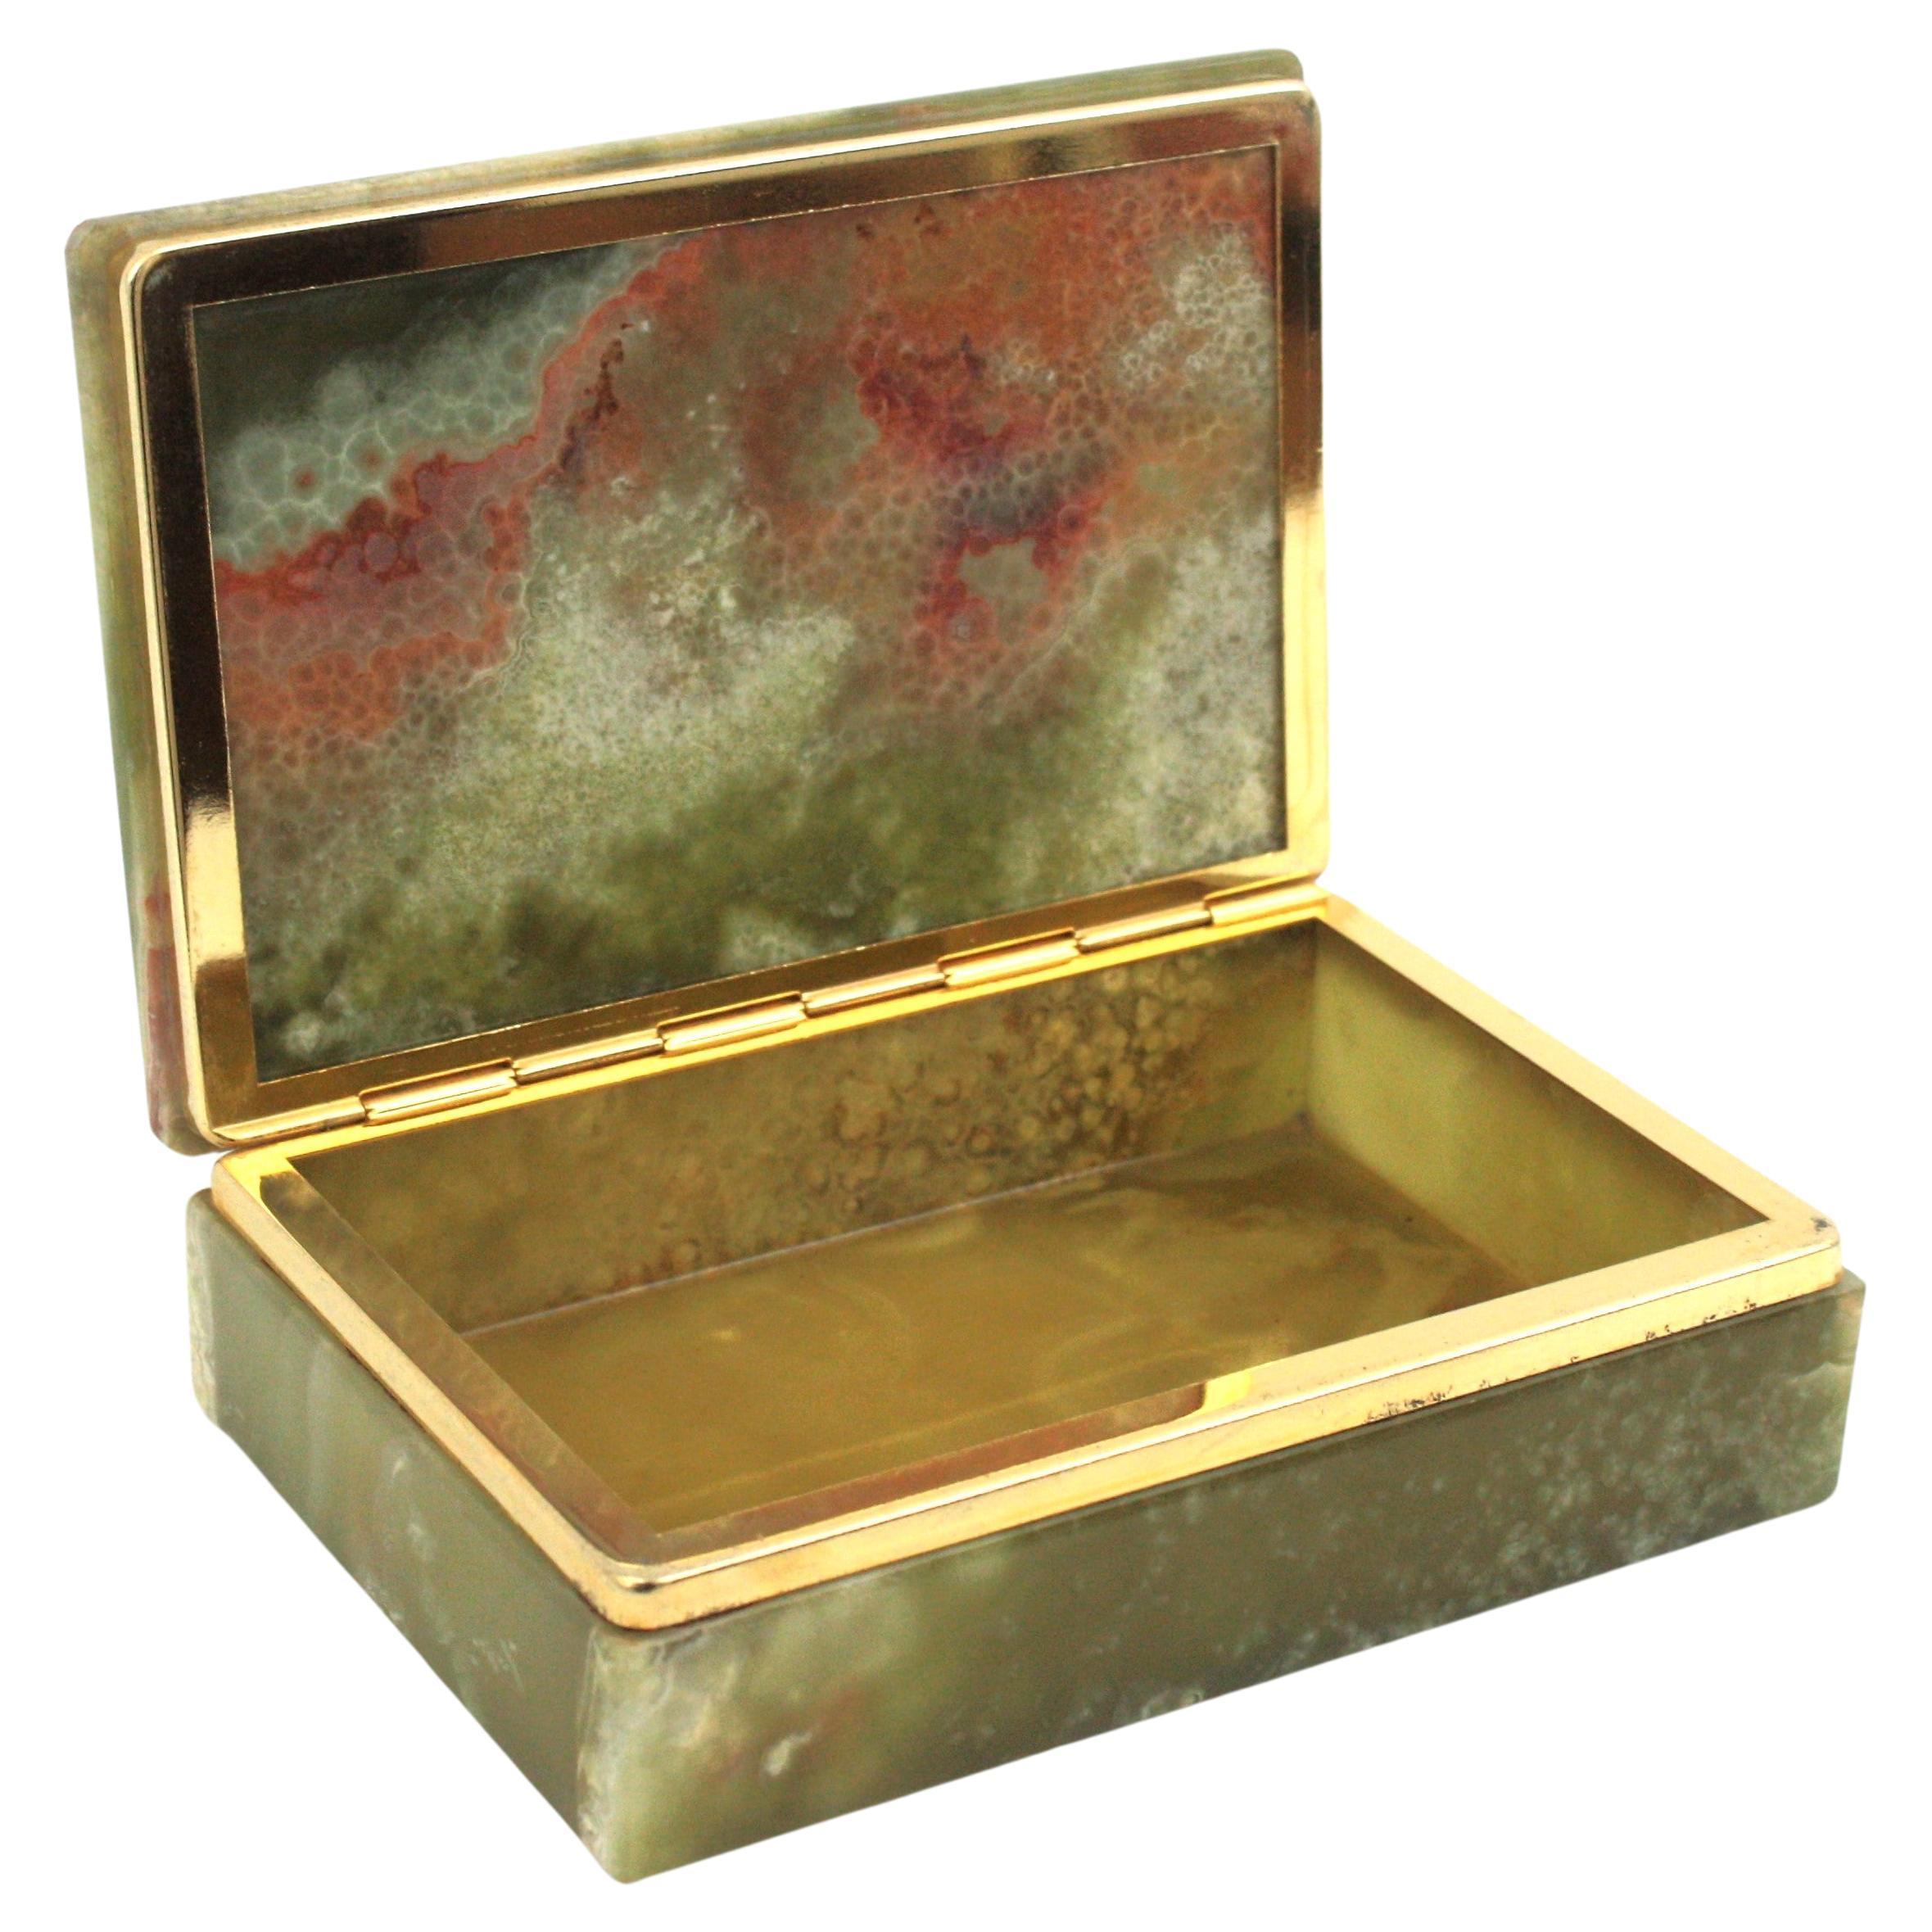 Mid-Century Modern hinged box veneered in fine Onyx stone, Spain, 1950s.
This exquisite vintage 1950s rectangular box is all constructed with onyx and features a brass hinge.
This trinket box shows beautiful eye-catching veins and bandings and it is